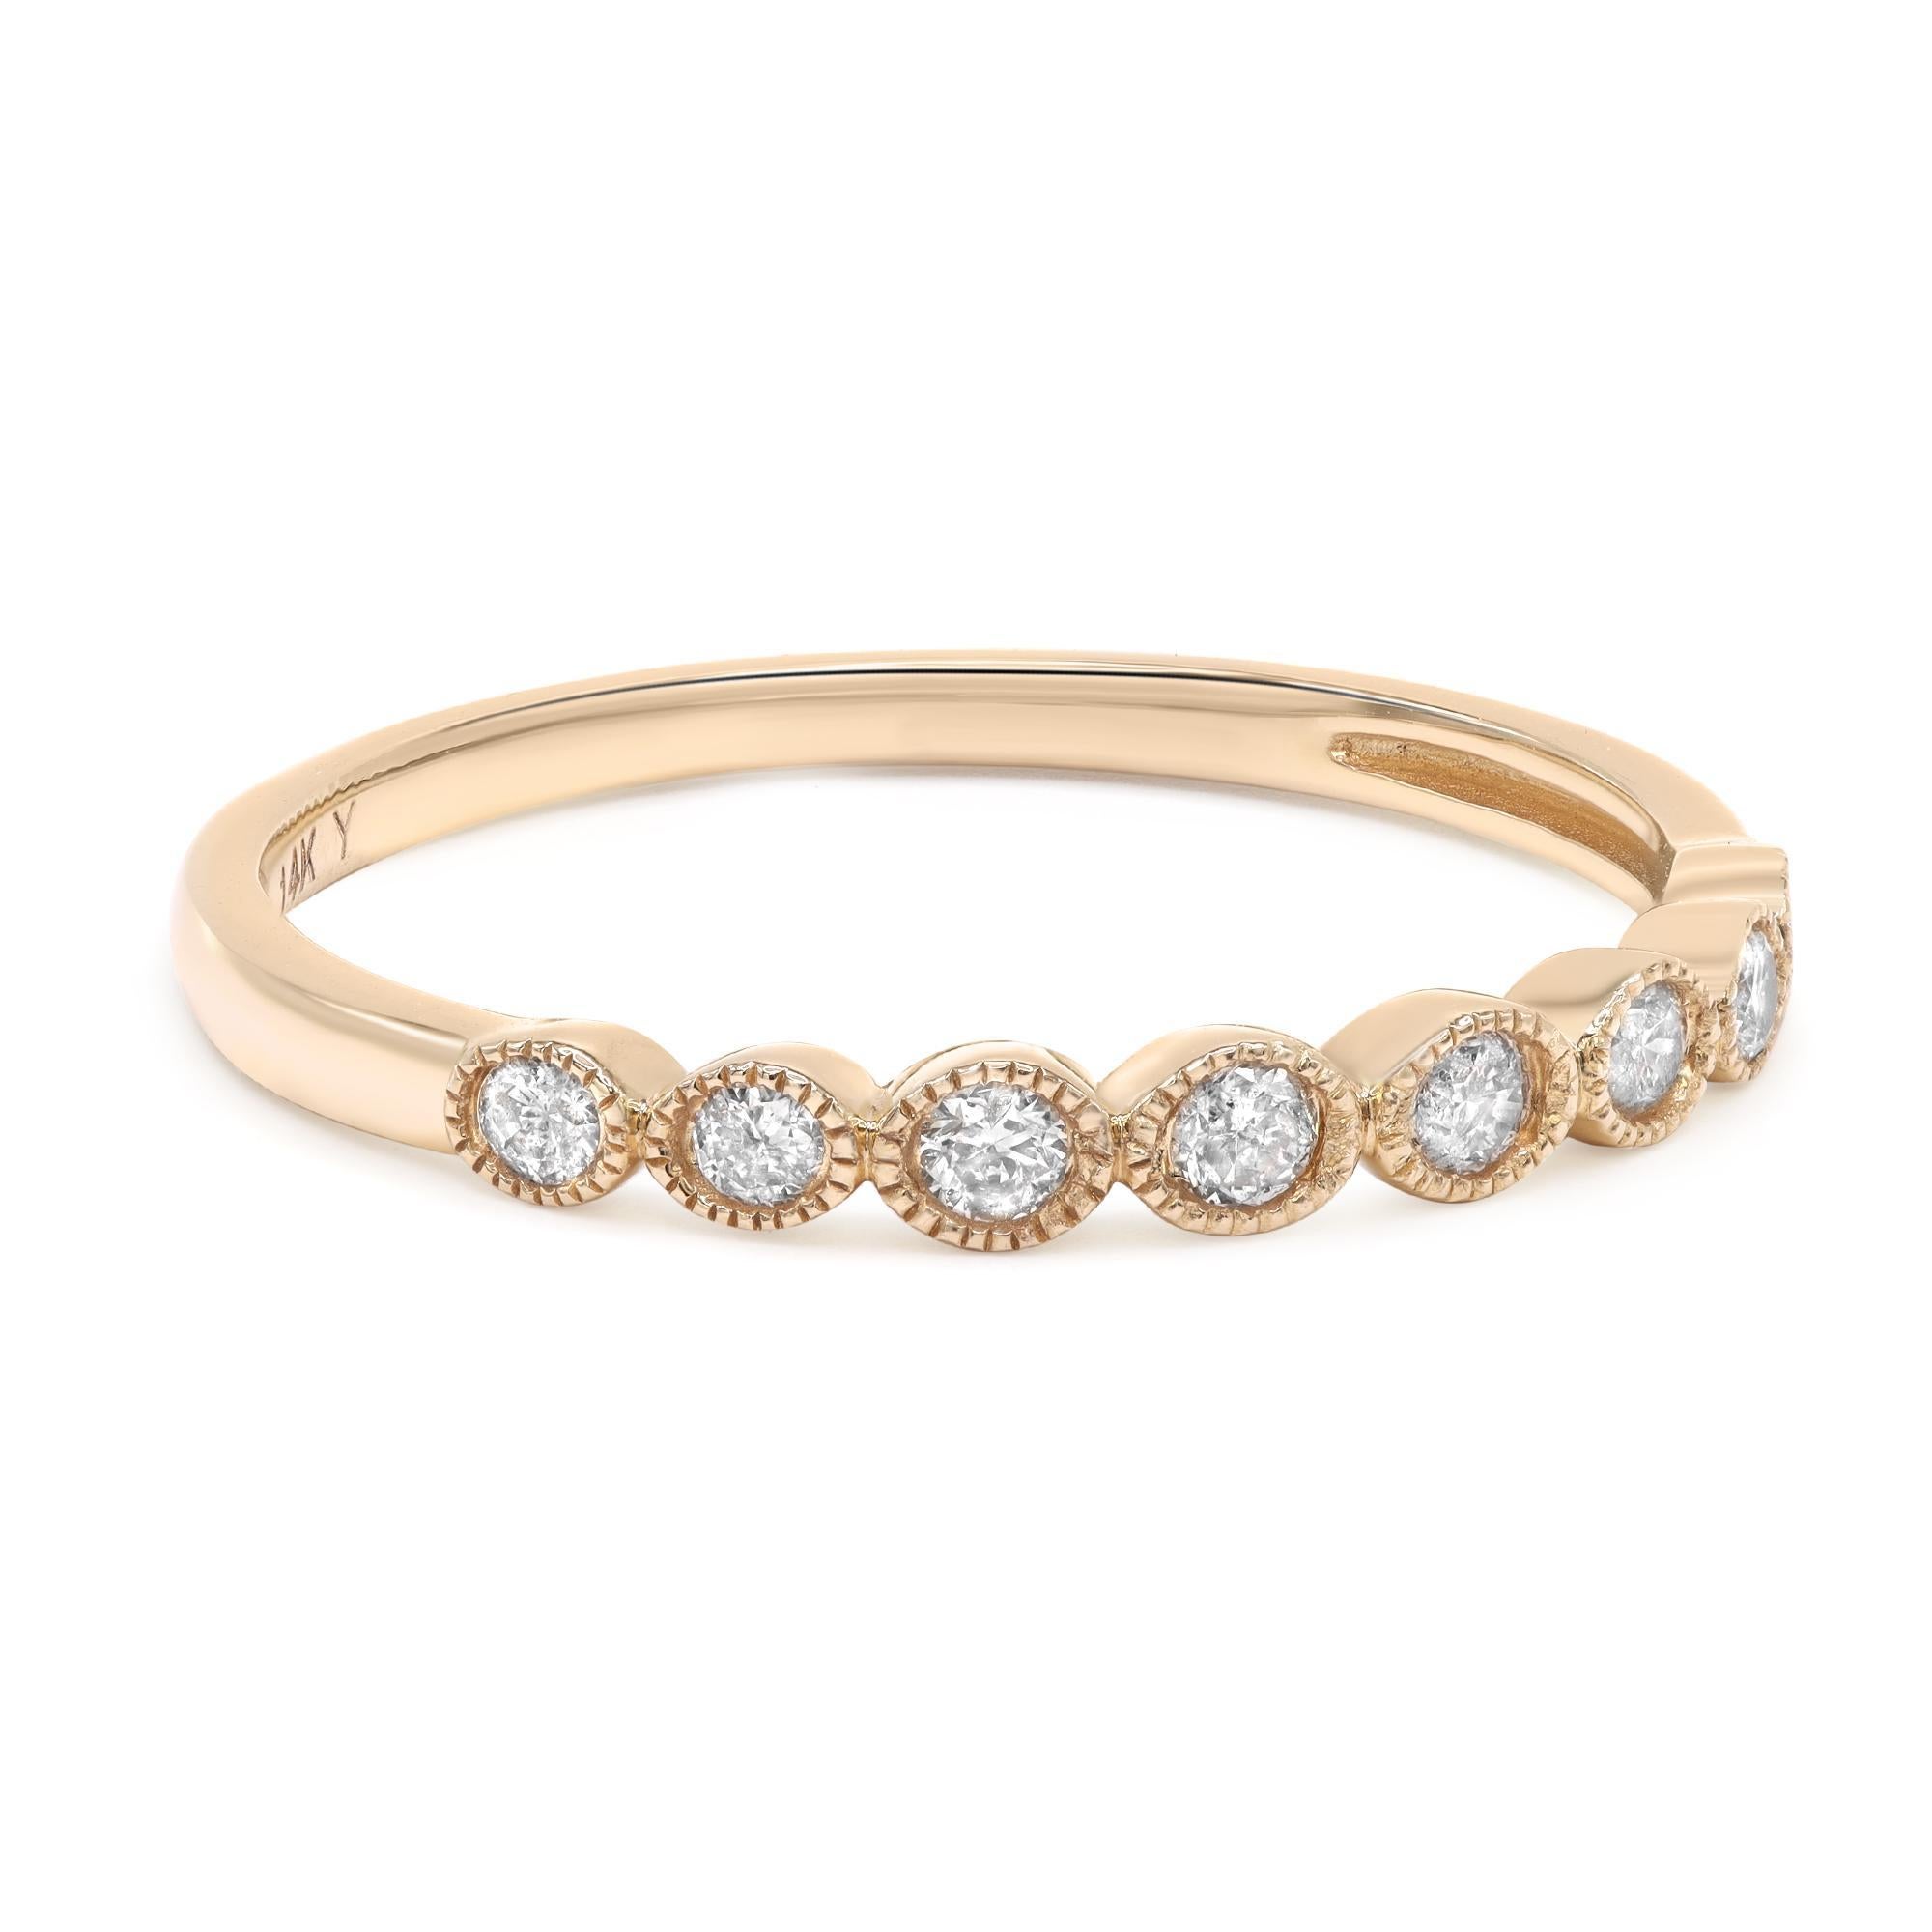 This beautiful pave set round cut diamond ring is a perfect fit for any occasion. Crafted in 14K yellow gold, it's stackable and easy to mix and match. The total diamond weight is 0.187cts. Ring size 7. Width: 2.4mm. Weight: 1.4 gms. Comes with a